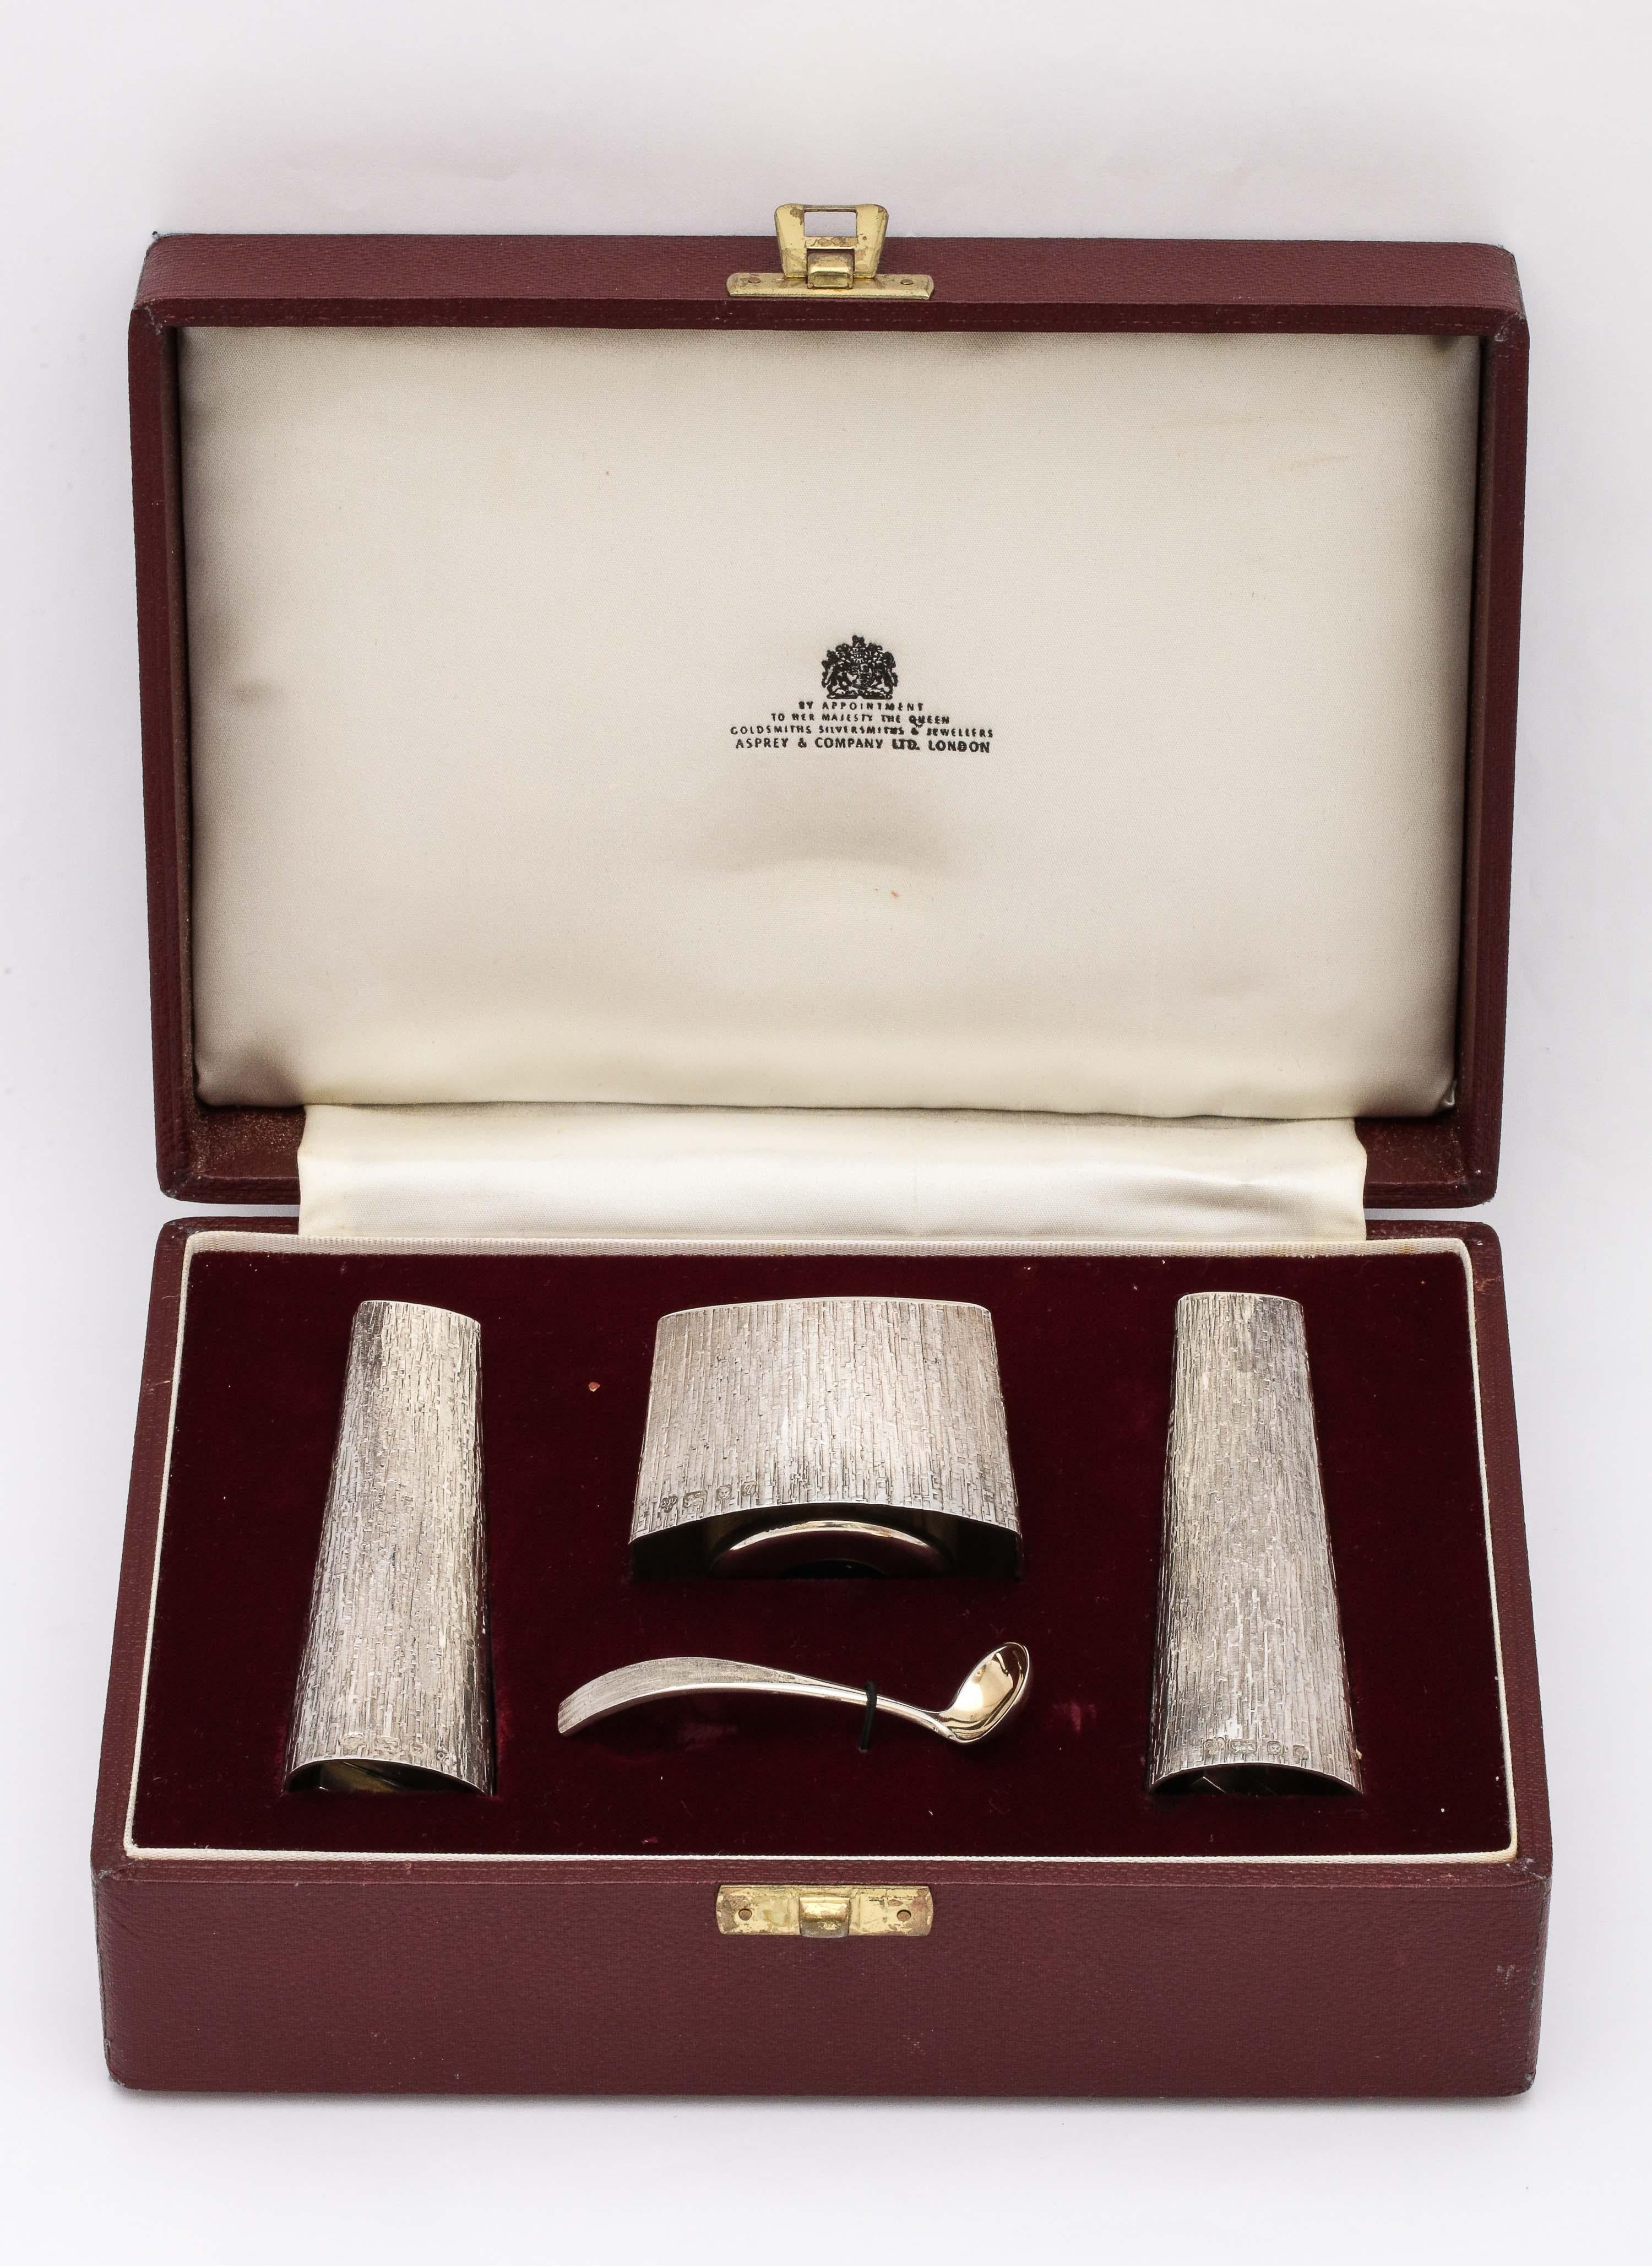 Mid-Century Modern style sterling silver condiments set in original box, consisting of a pair of salt and pepper shakers, an open mustard cellar and a matching mustard spoon, London, year hallmarked for 1971, Asprey and Company, Ltd. - makers.